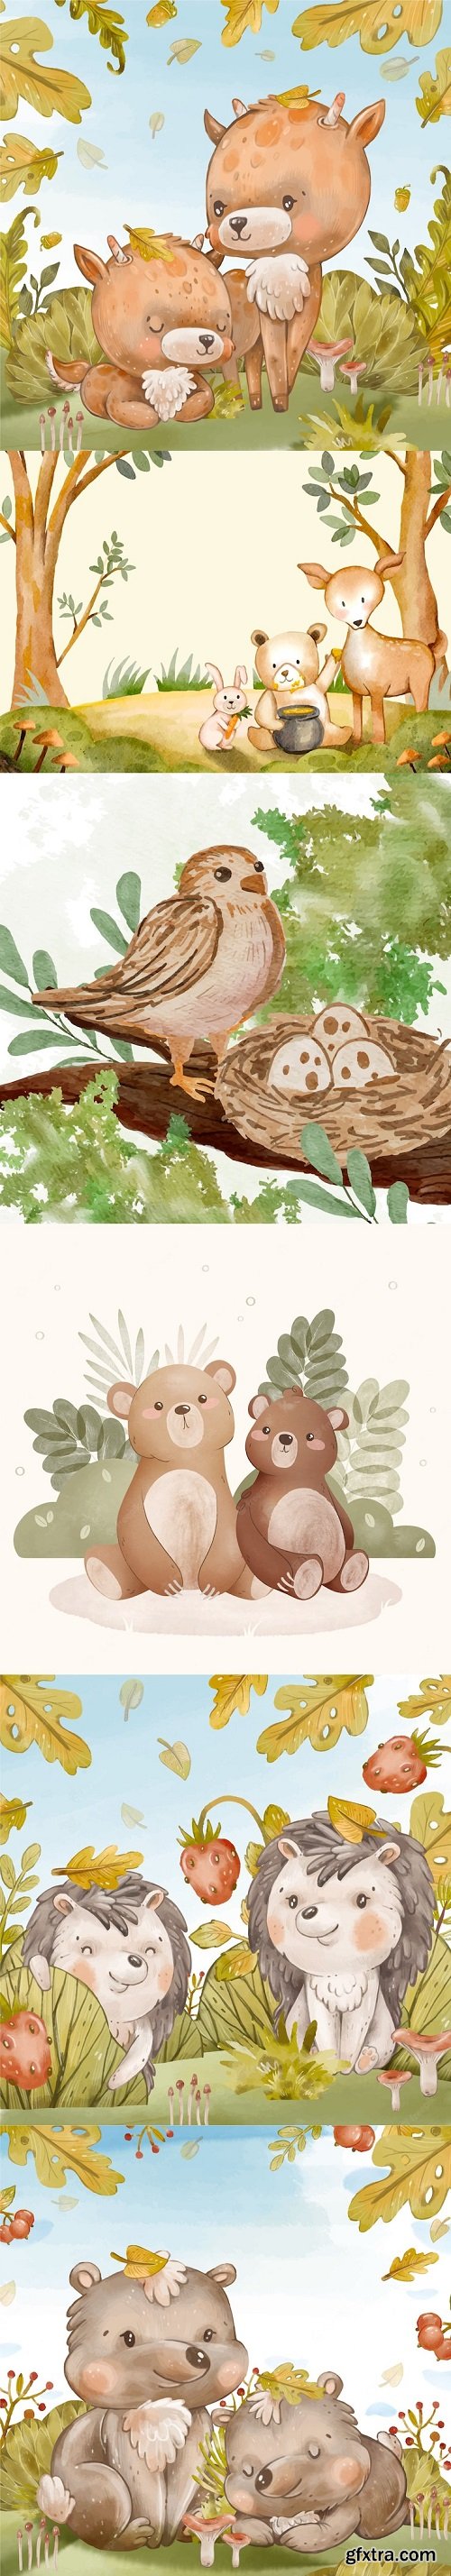 Watercolor forest animals illustration